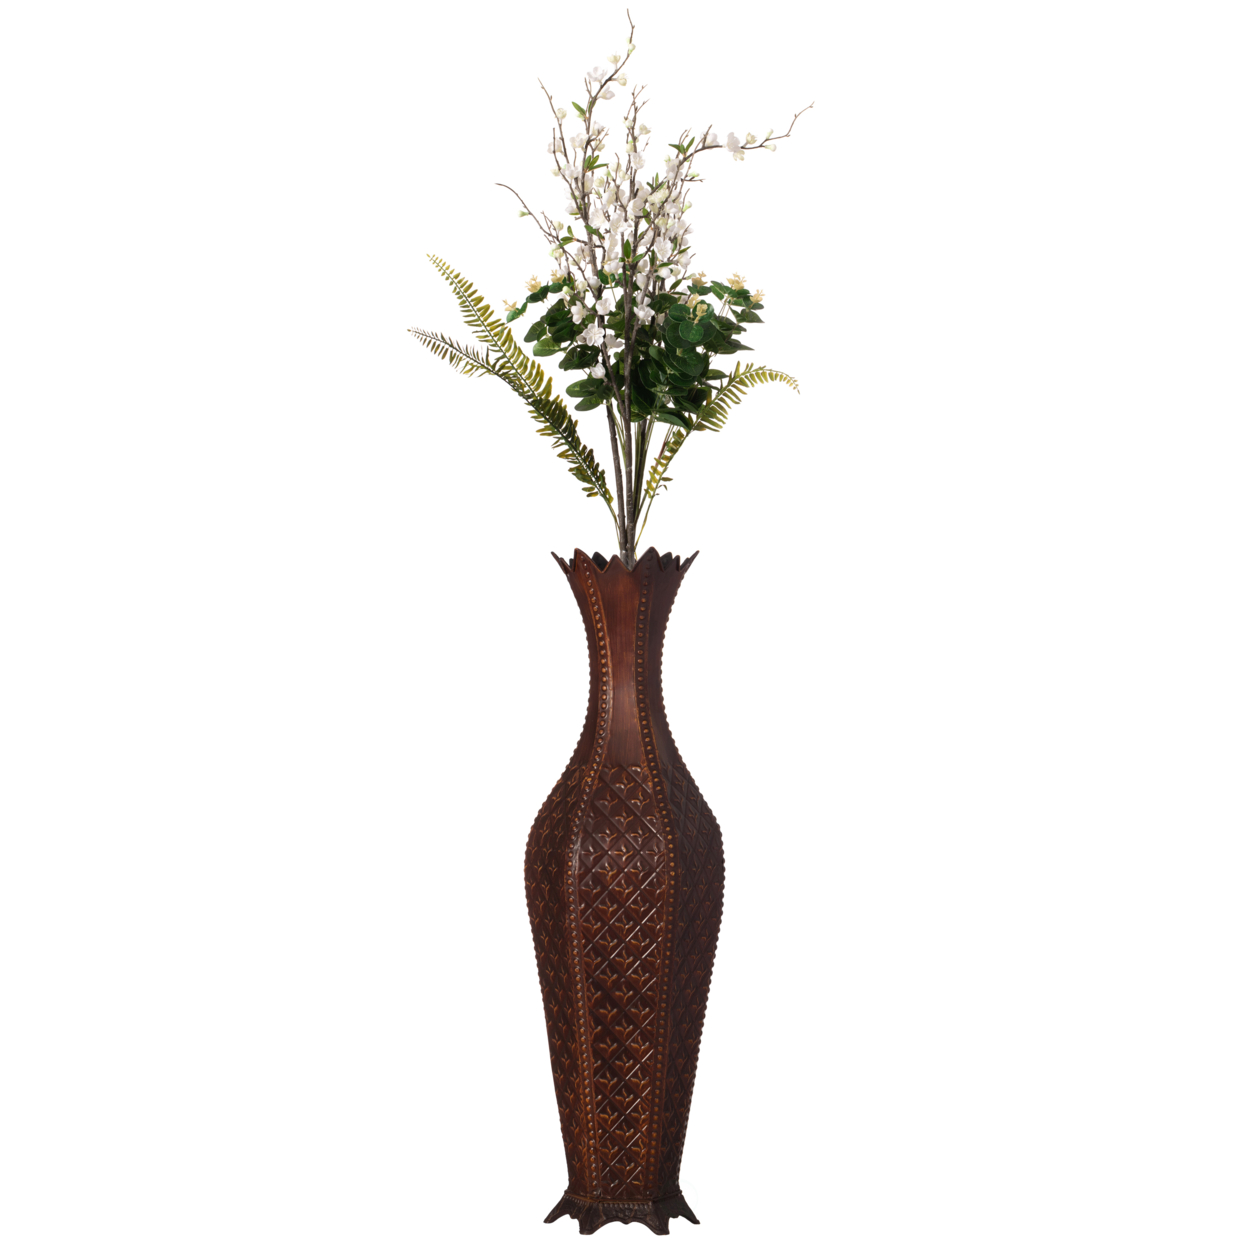 34 Brown Metal Floor Vase Centerpiece Home Decor For Dried And Artificial Flower For Living Room And Bedroom Decoration